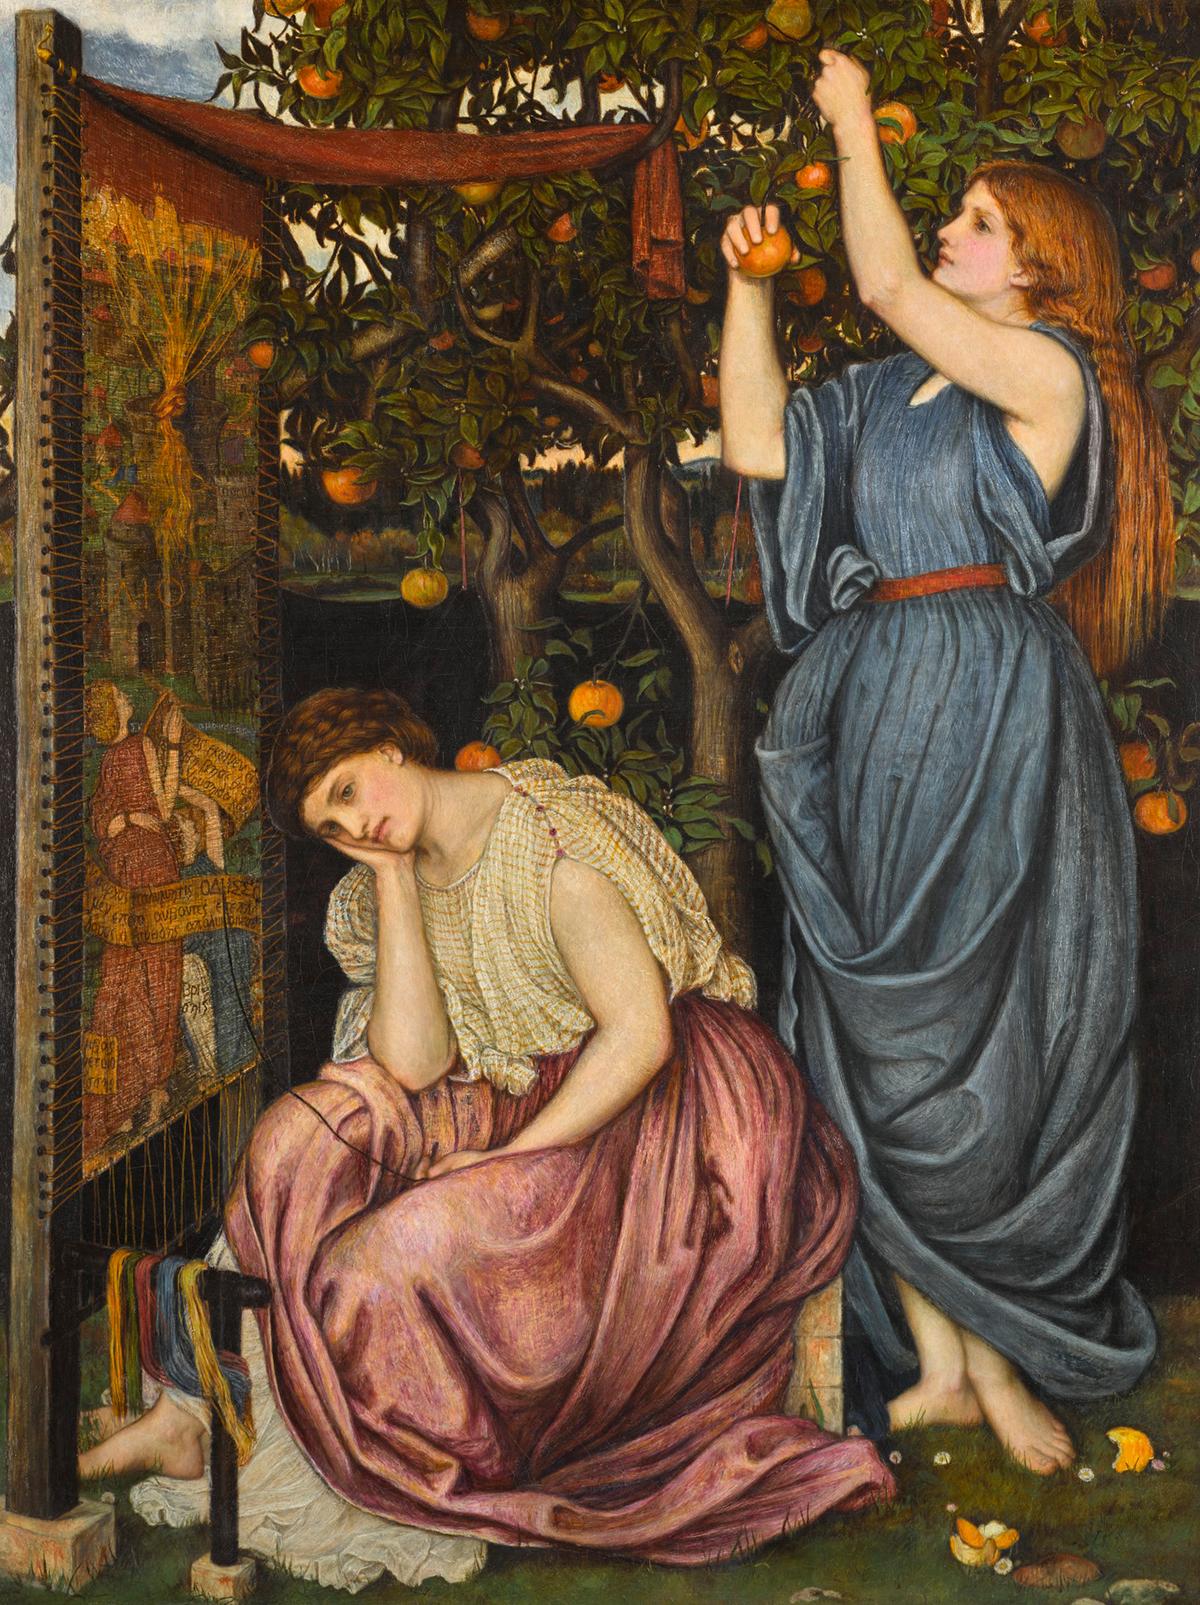 Steadfast in her fidelity to Odysseus, Penelope (L) sits forlorn at her tapestry loom while a handmaiden picks apples, representing the temptation that lurks around her. "Penelope," 1864, by John Roddam Spencer Stanhope. Oil on canvas. Private Collection. (Public Domain)